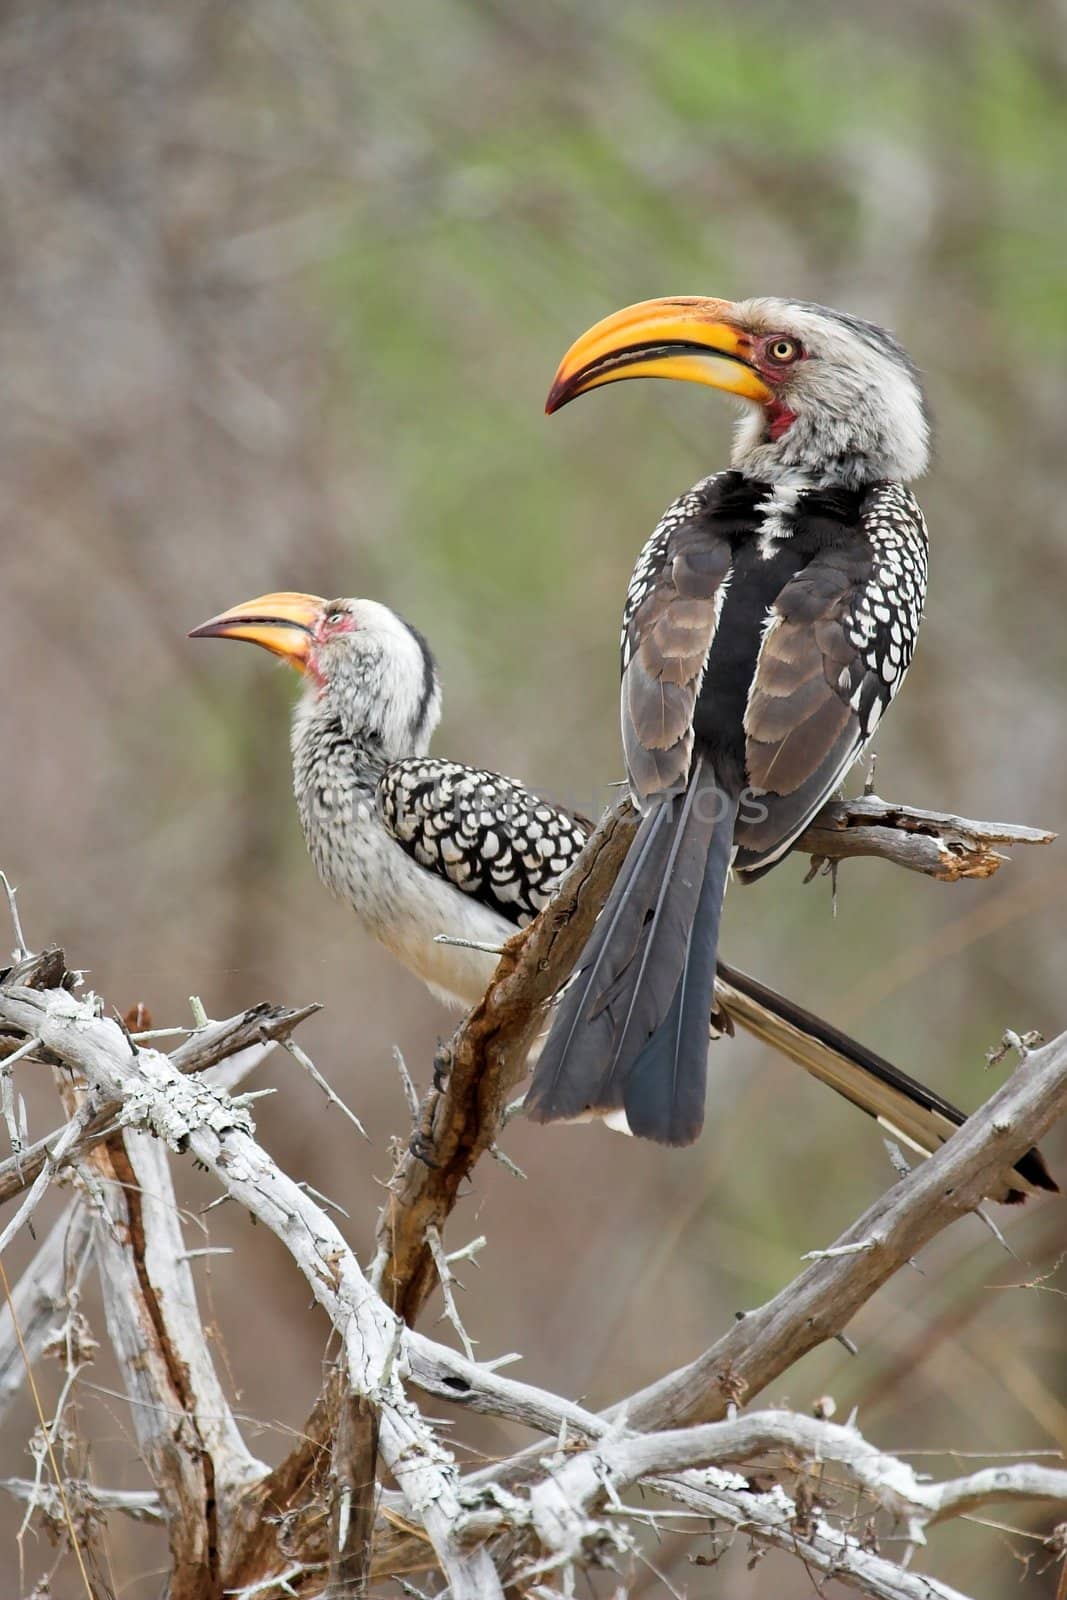 A pair of Southern Yellow-billed Hornbills on a branch